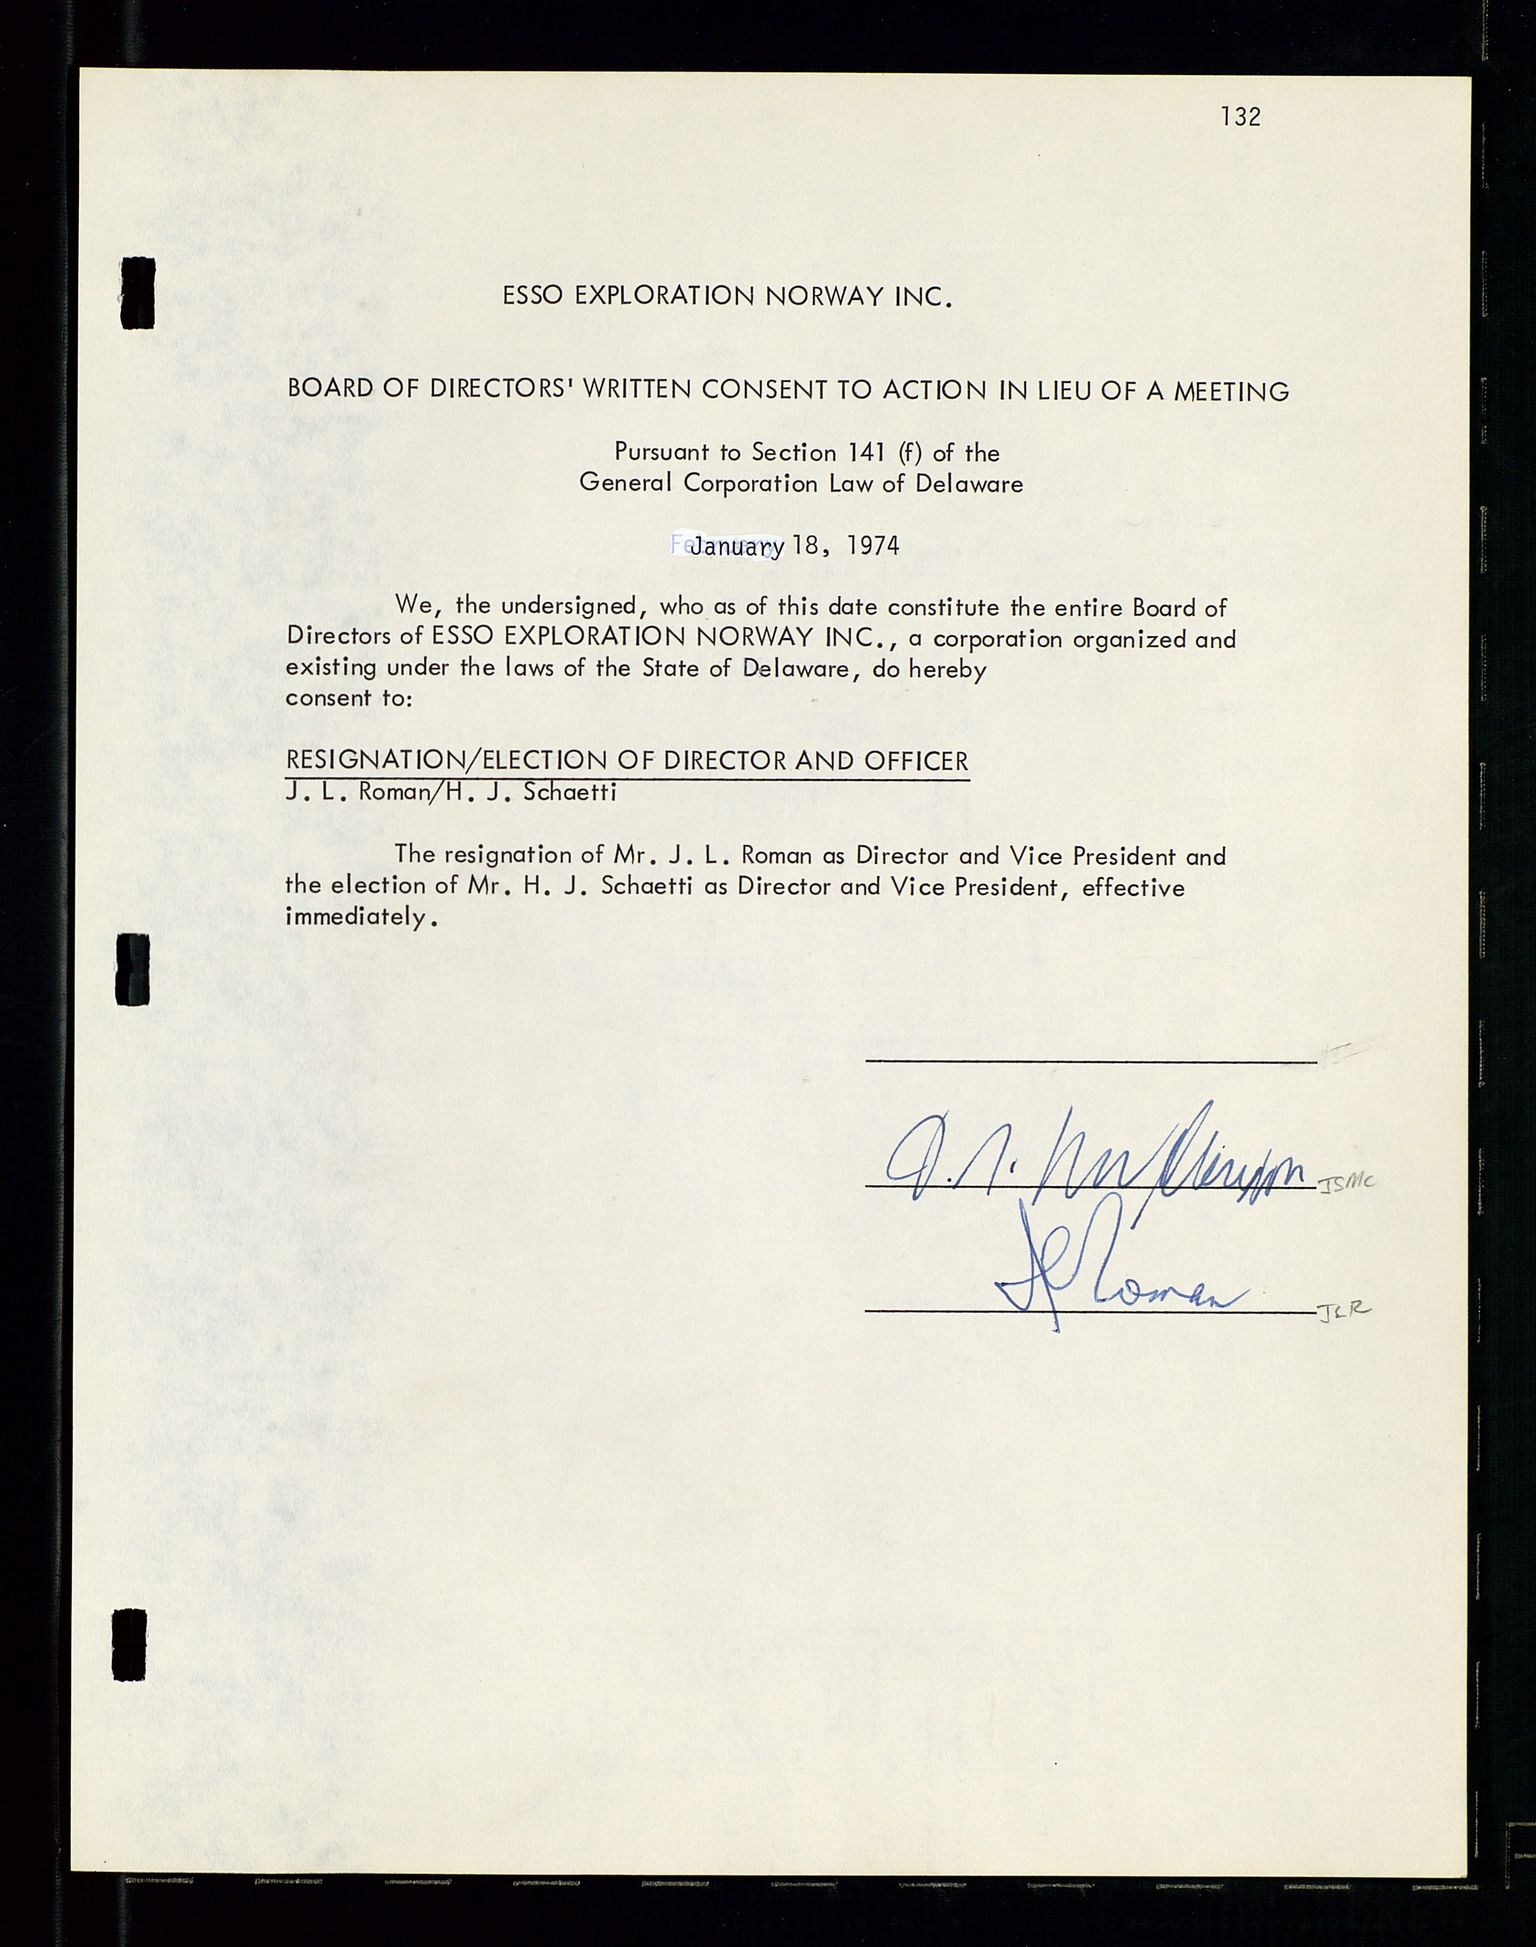 Pa 1512 - Esso Exploration and Production Norway Inc., SAST/A-101917/A/Aa/L0001/0001: Styredokumenter / Corporate records, By-Laws, Board meeting minutes, Incorporations, 1965-1975, s. 132